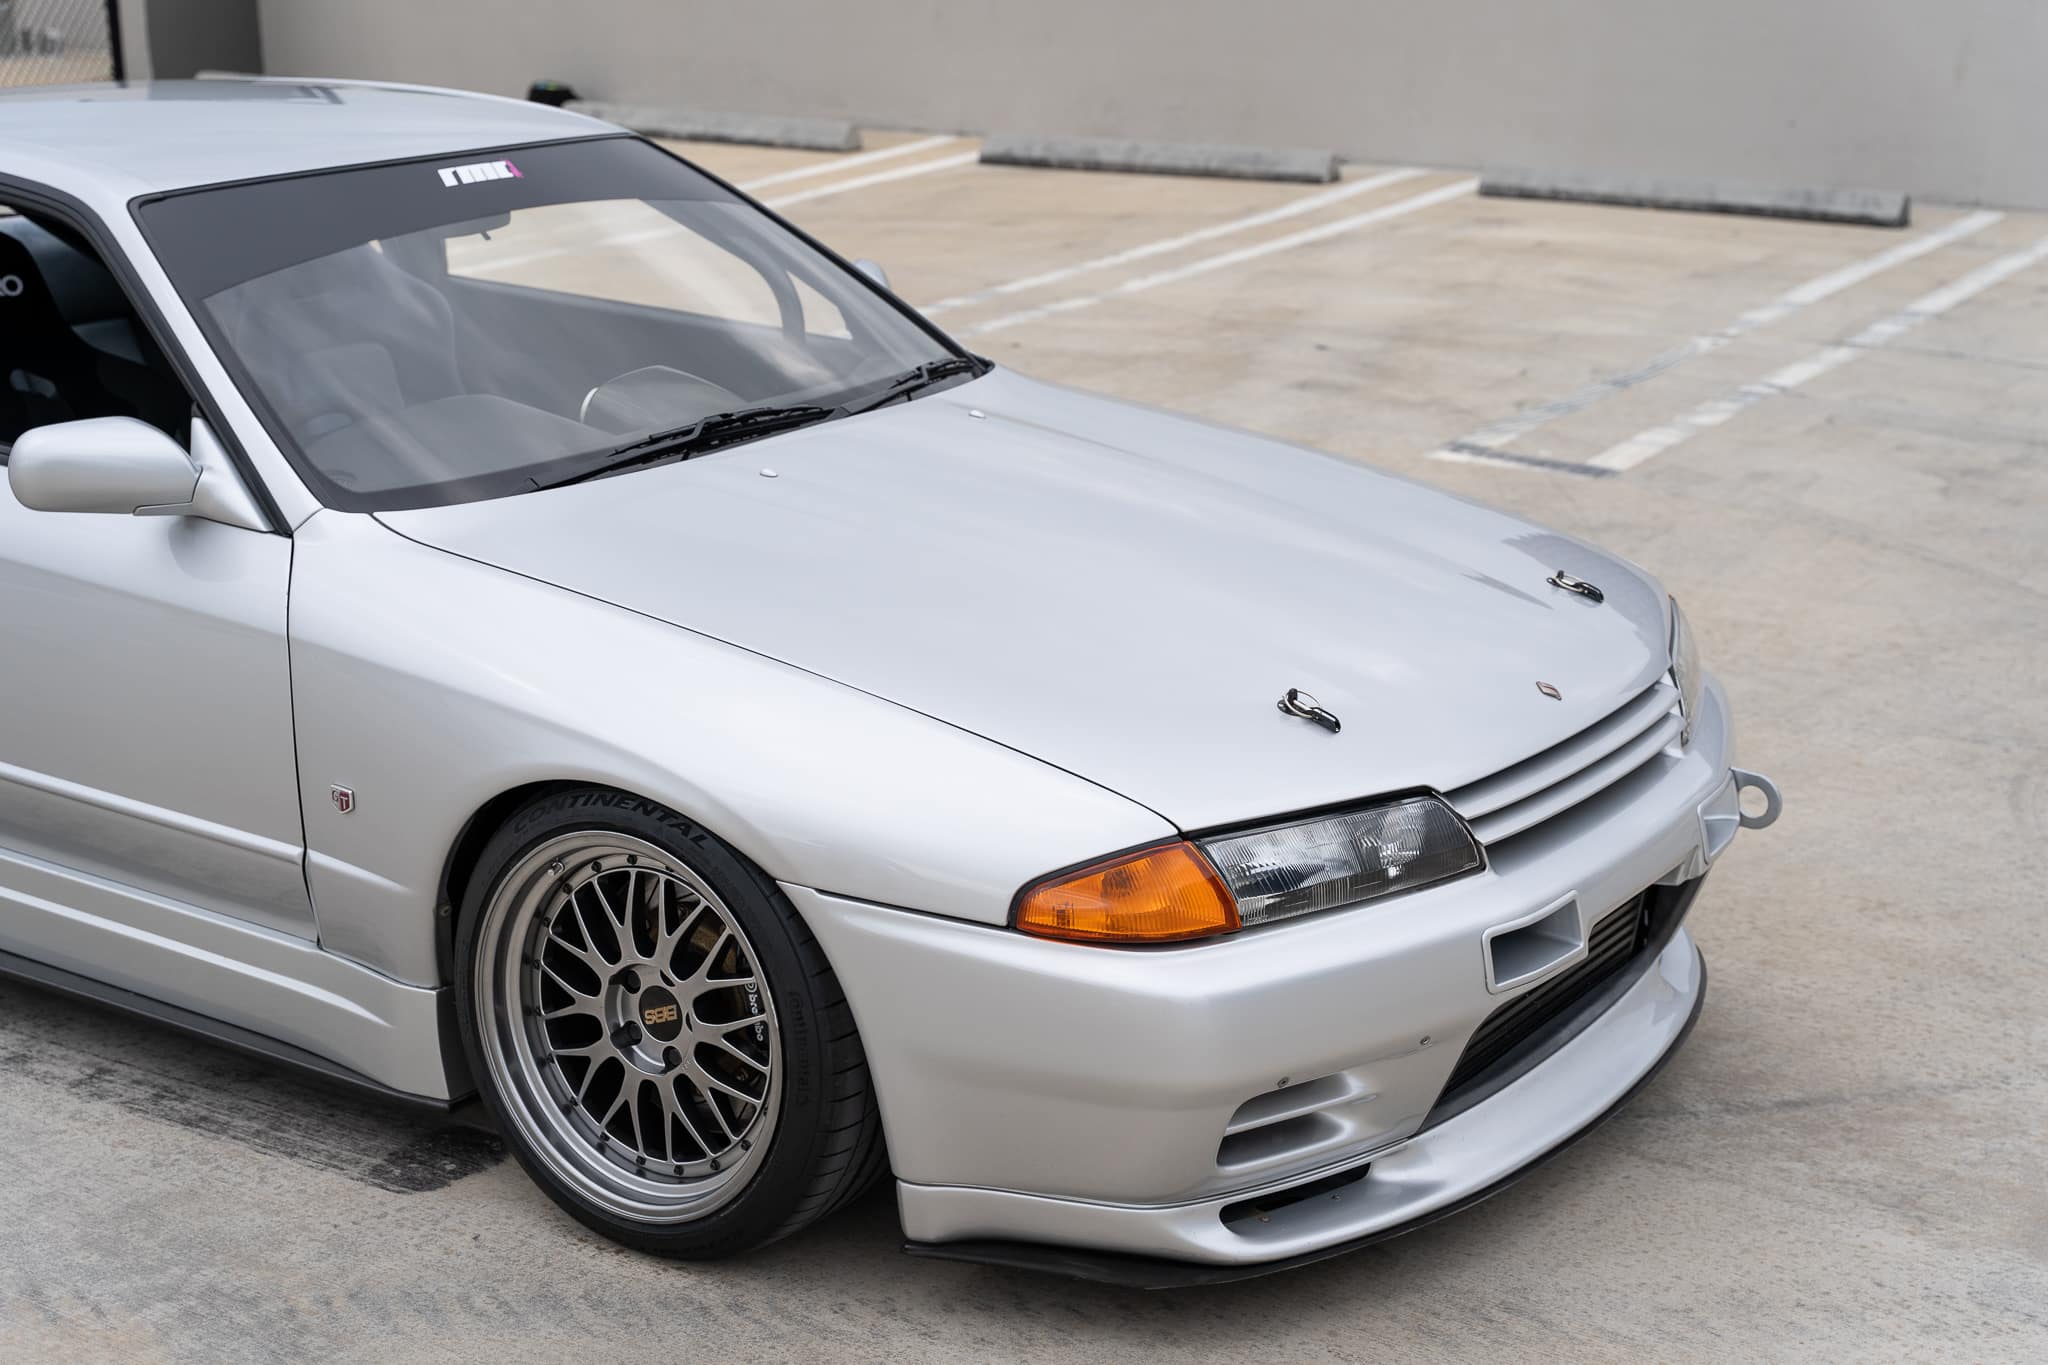 1994 R32 Skyline GTR Built by Bee*R Bee*R built Demo car | 2.8L V-Cam | 678awhp | Sequential Gearbox | Brembo BBK | Fully Serviced | Holinger | Tomei | A\C | Turn Key